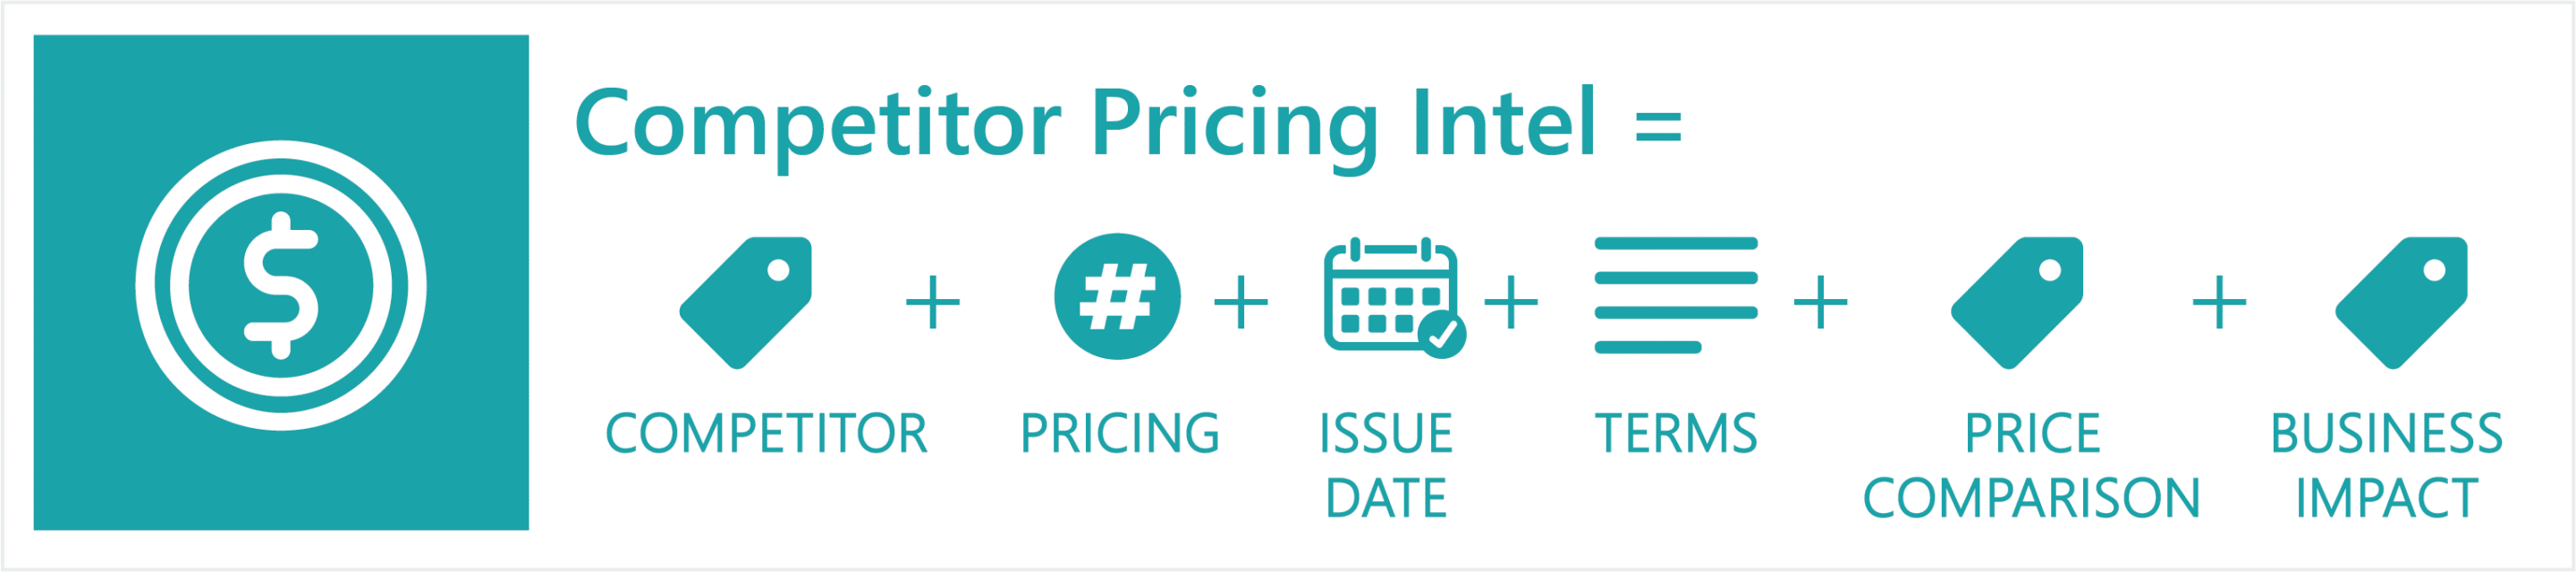 Groopit Competitor Pricing Intel